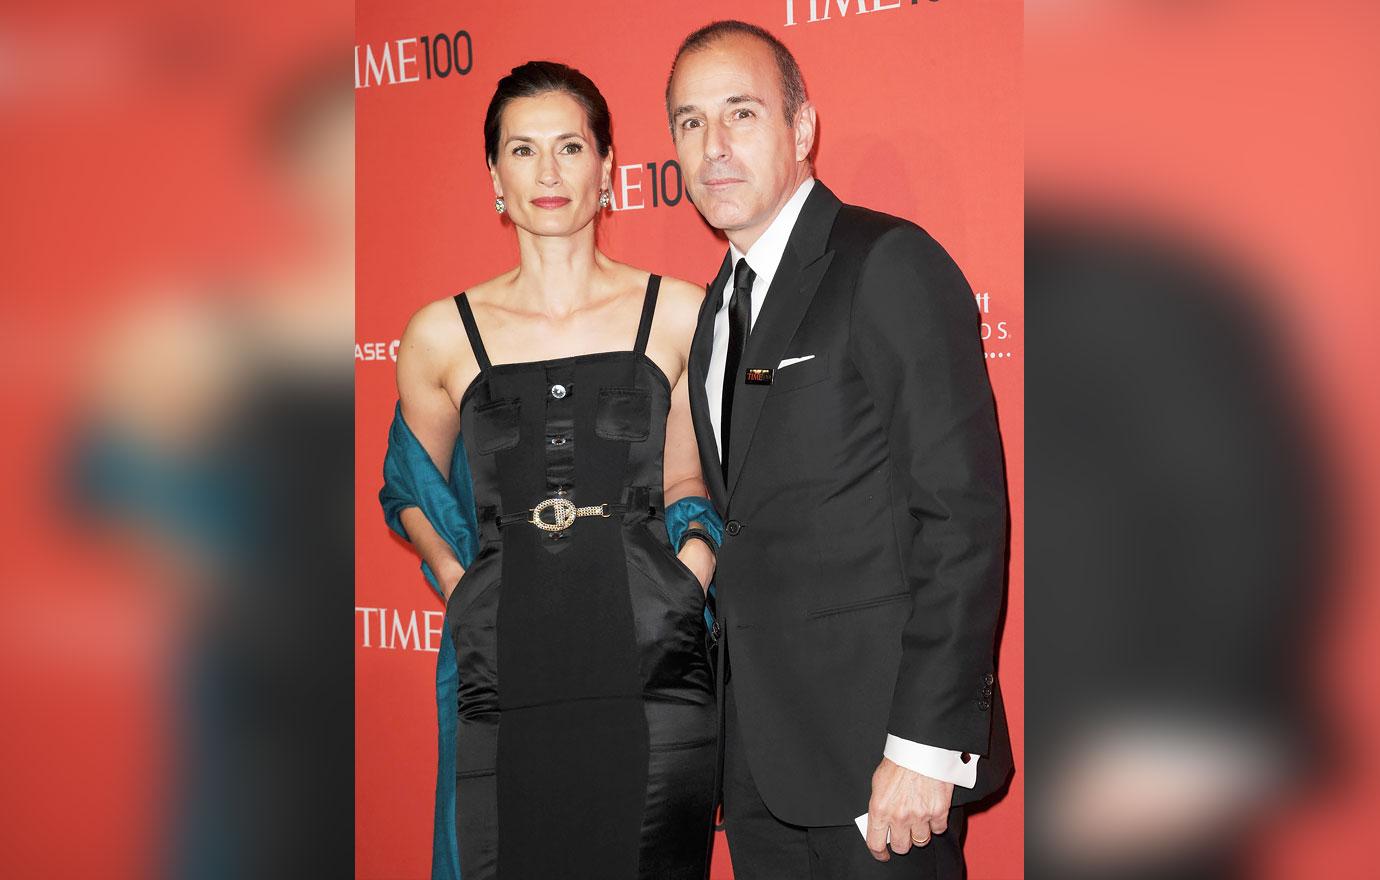 Matt Lauer’s girlfriend, Shamin Abas: Check out some interesting facts about her as well